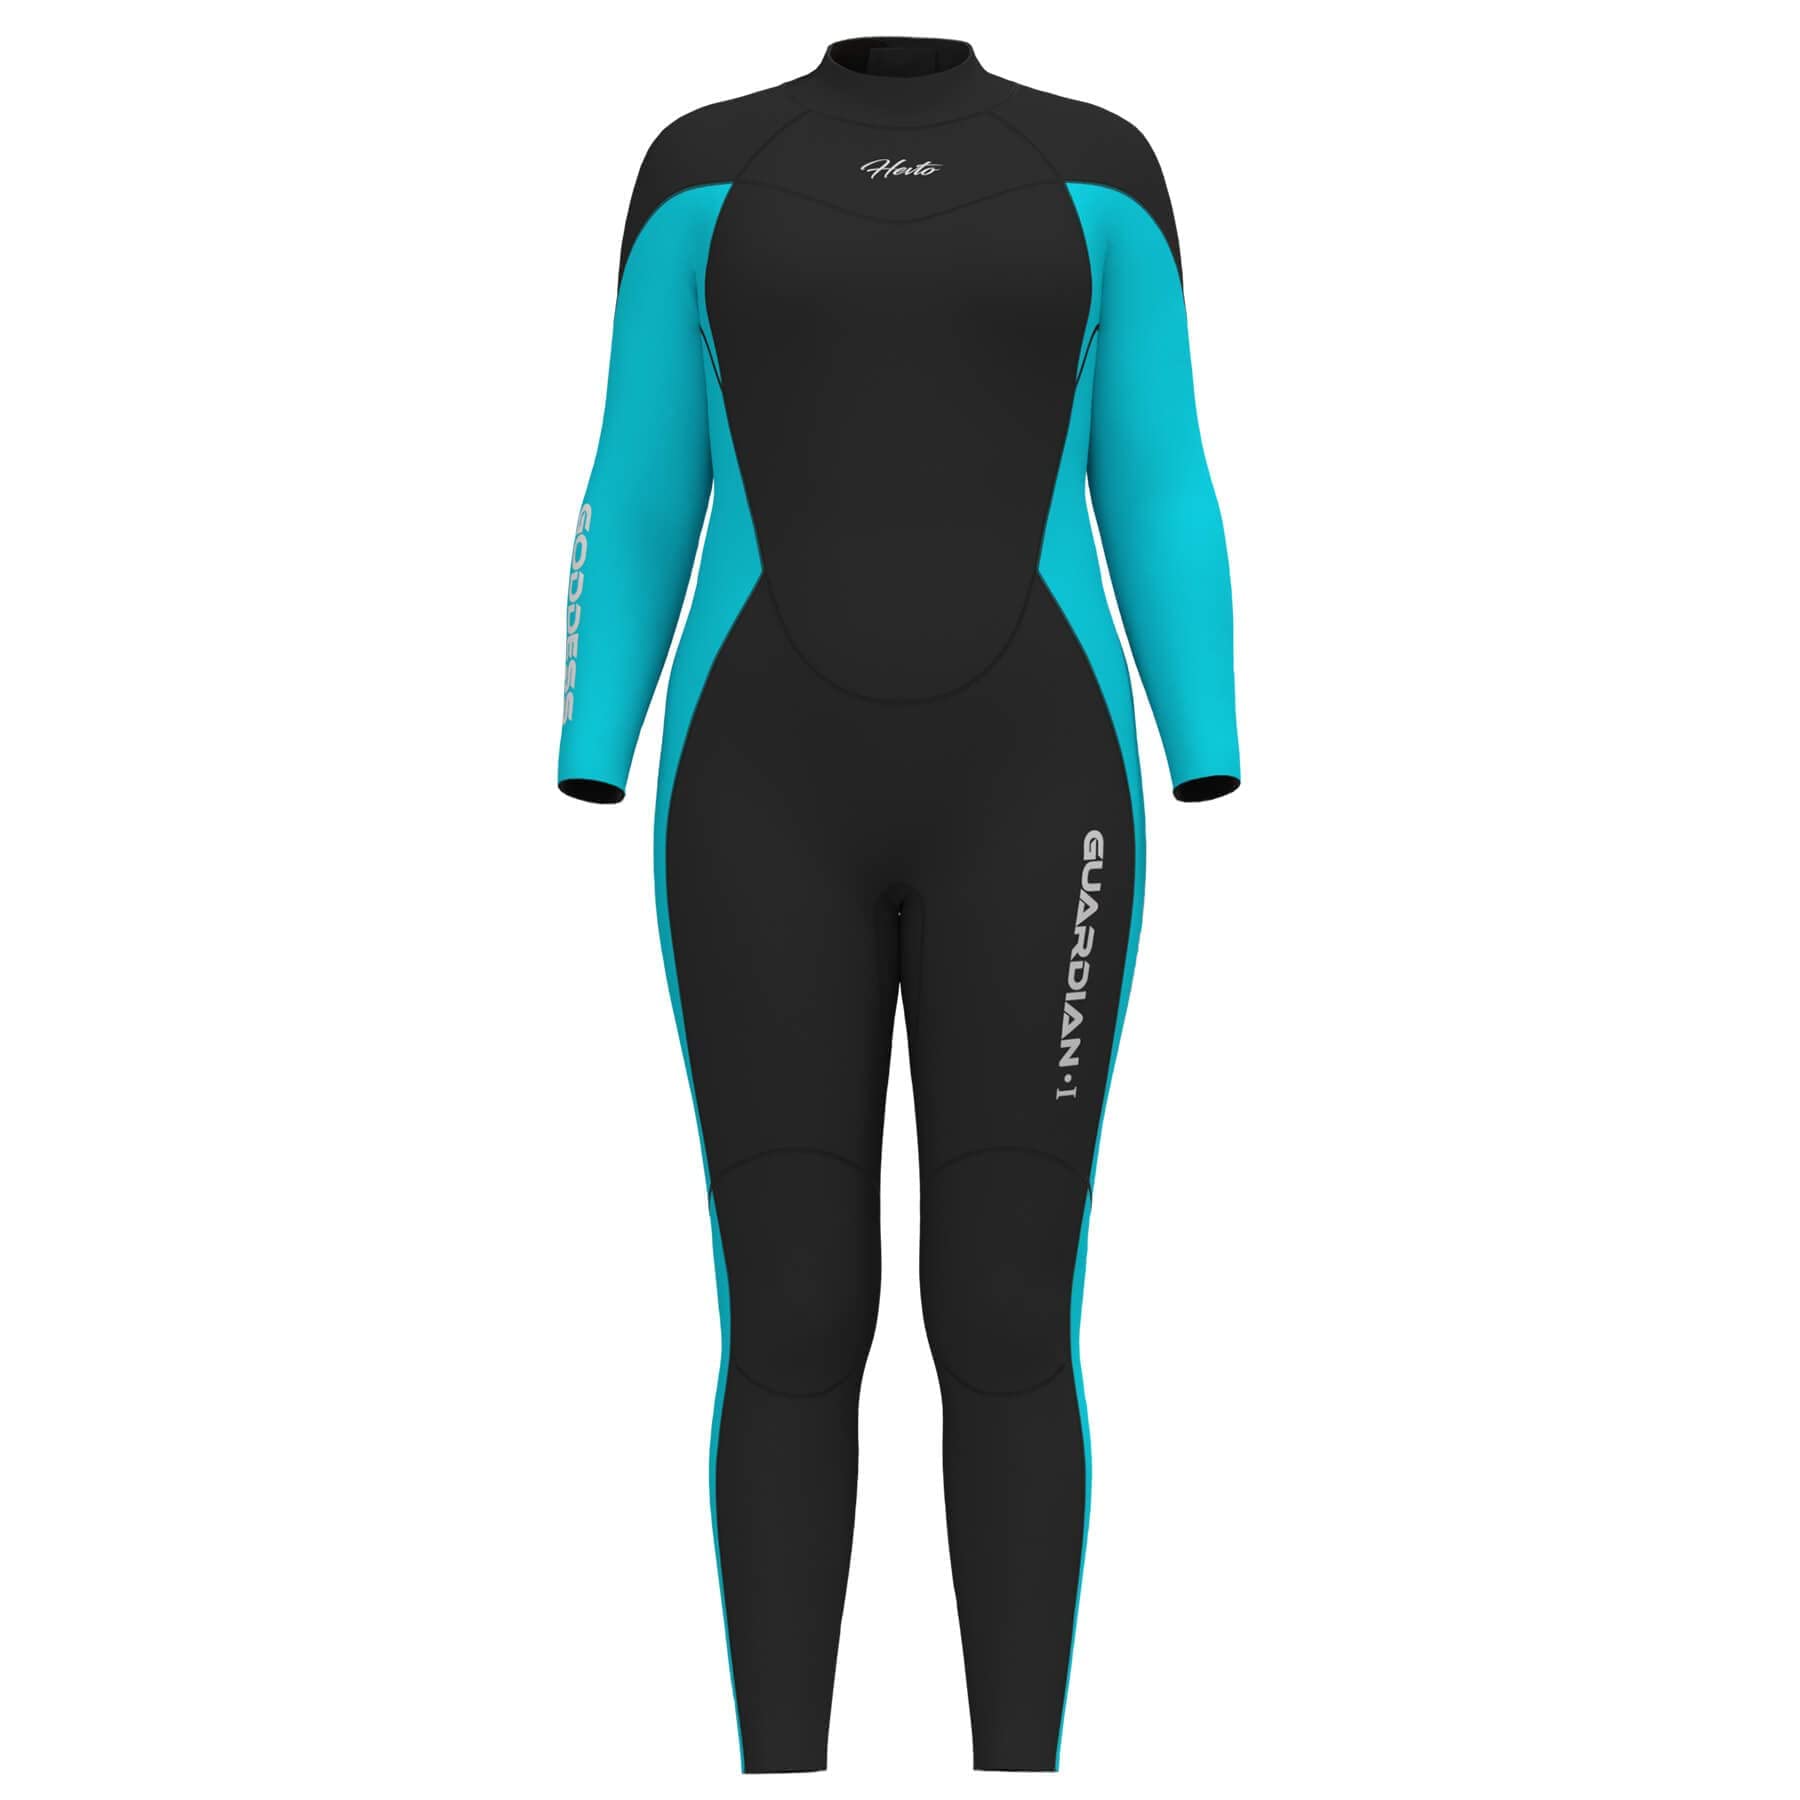 Mua Hevto Men and Women Wetsuits 3/2mm Neoprene Wet Suit Keep Warm in Cold  Water for Surfing Swimming Diving trên Amazon Mỹ chính hãng 2023  Giaonhan247